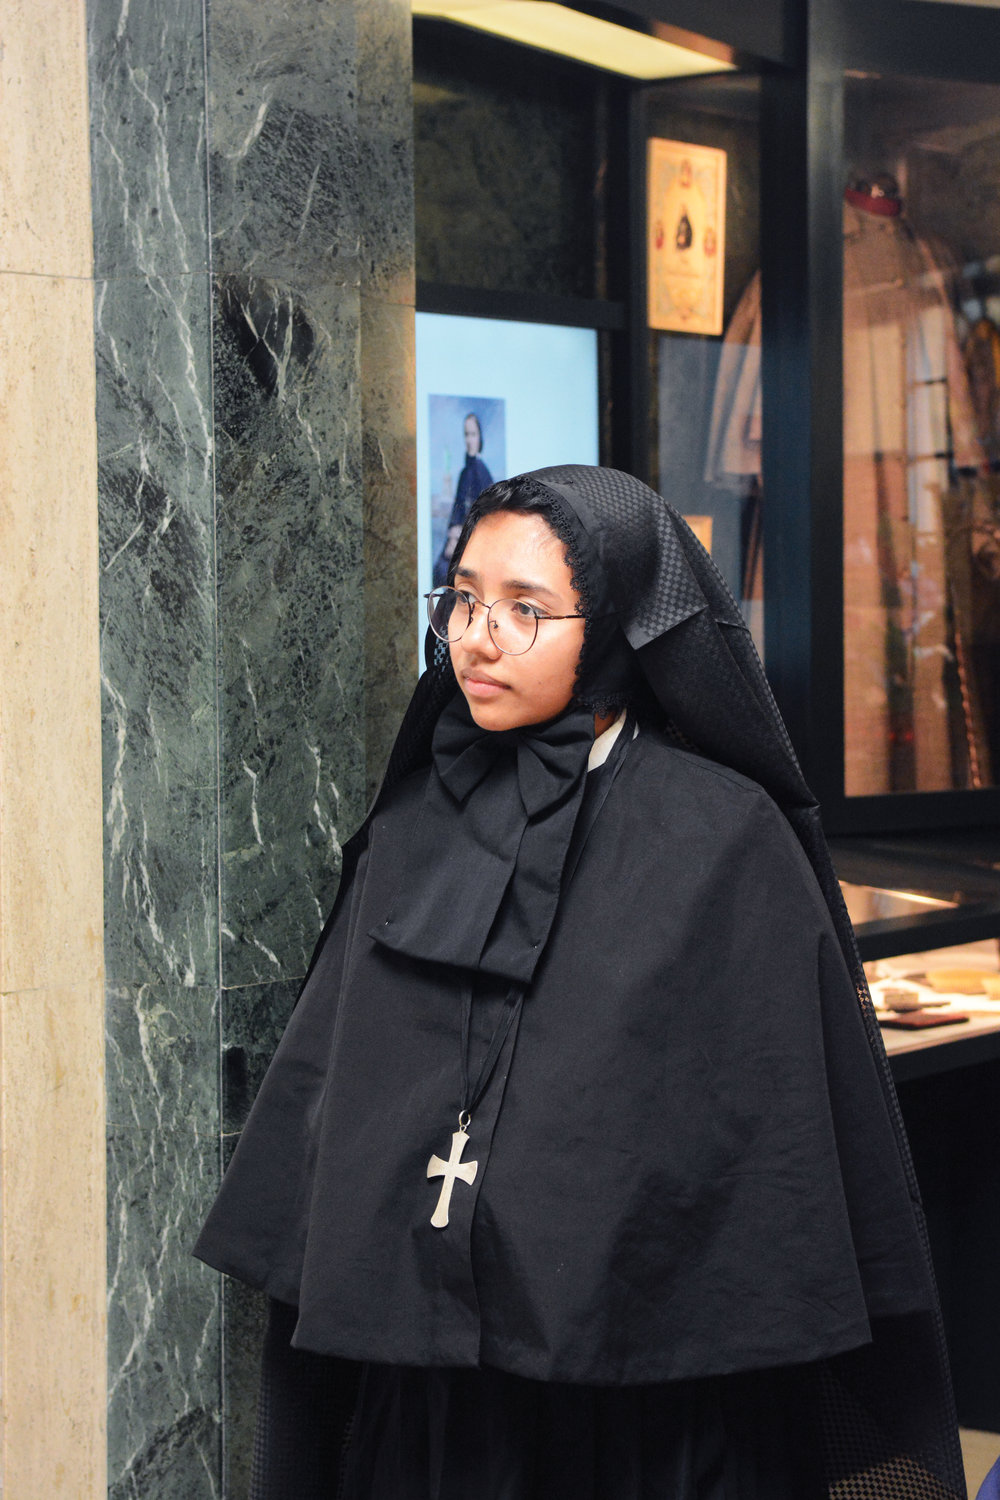 Bianca Huertas, dressed in period attire of Mother Cabrini’s Missionary Sisters of the Sacred Heart of Jesus, was a perfect fit at a celebration marking the saint’s 169th birthday July 13 at the Manhattan shrine named for her. Ms. Huertas, who was born in Guatemala, is in her first year of formation with the Cabrini Sisters.